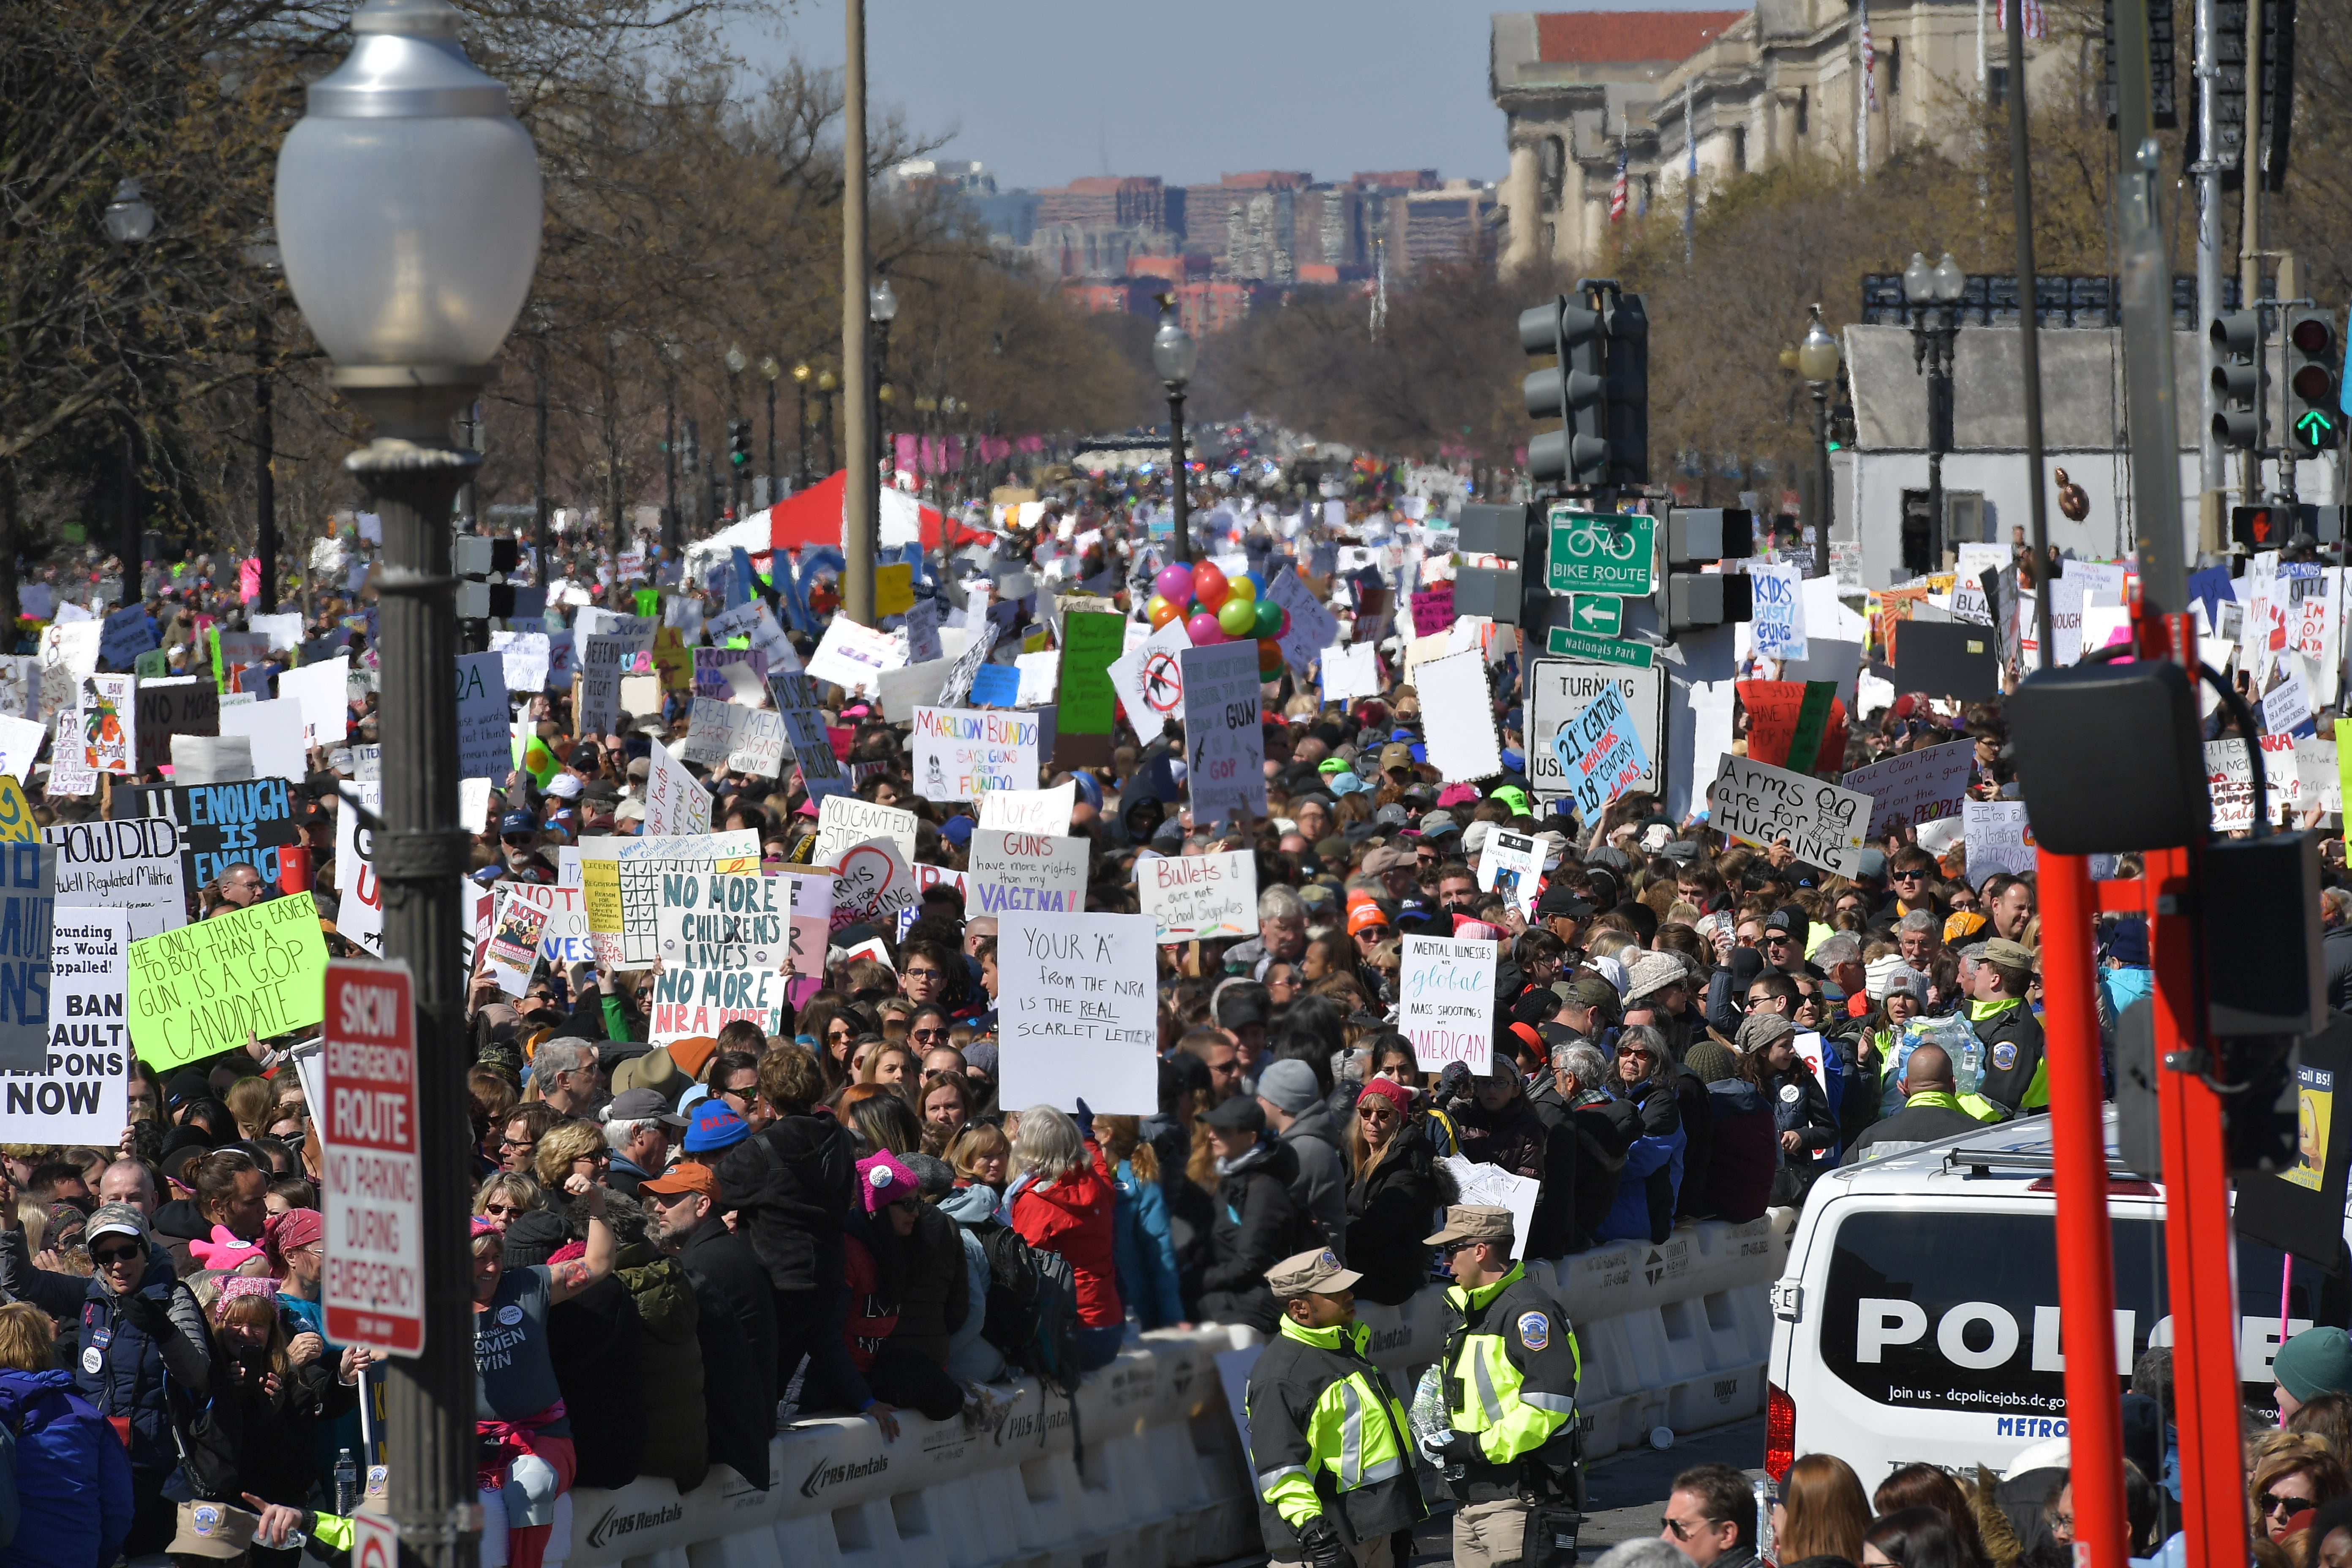 People gather at the March for Our Lives Rally in Washington, DC on March 24, 2018. Galvanized by a massacre at a Florida high school, hundreds of thousands of Americans are expected to take to the streets in cities across the United States on Saturday in the biggest protest for gun control in a generation. (NGAN/AFP/Getty Images)